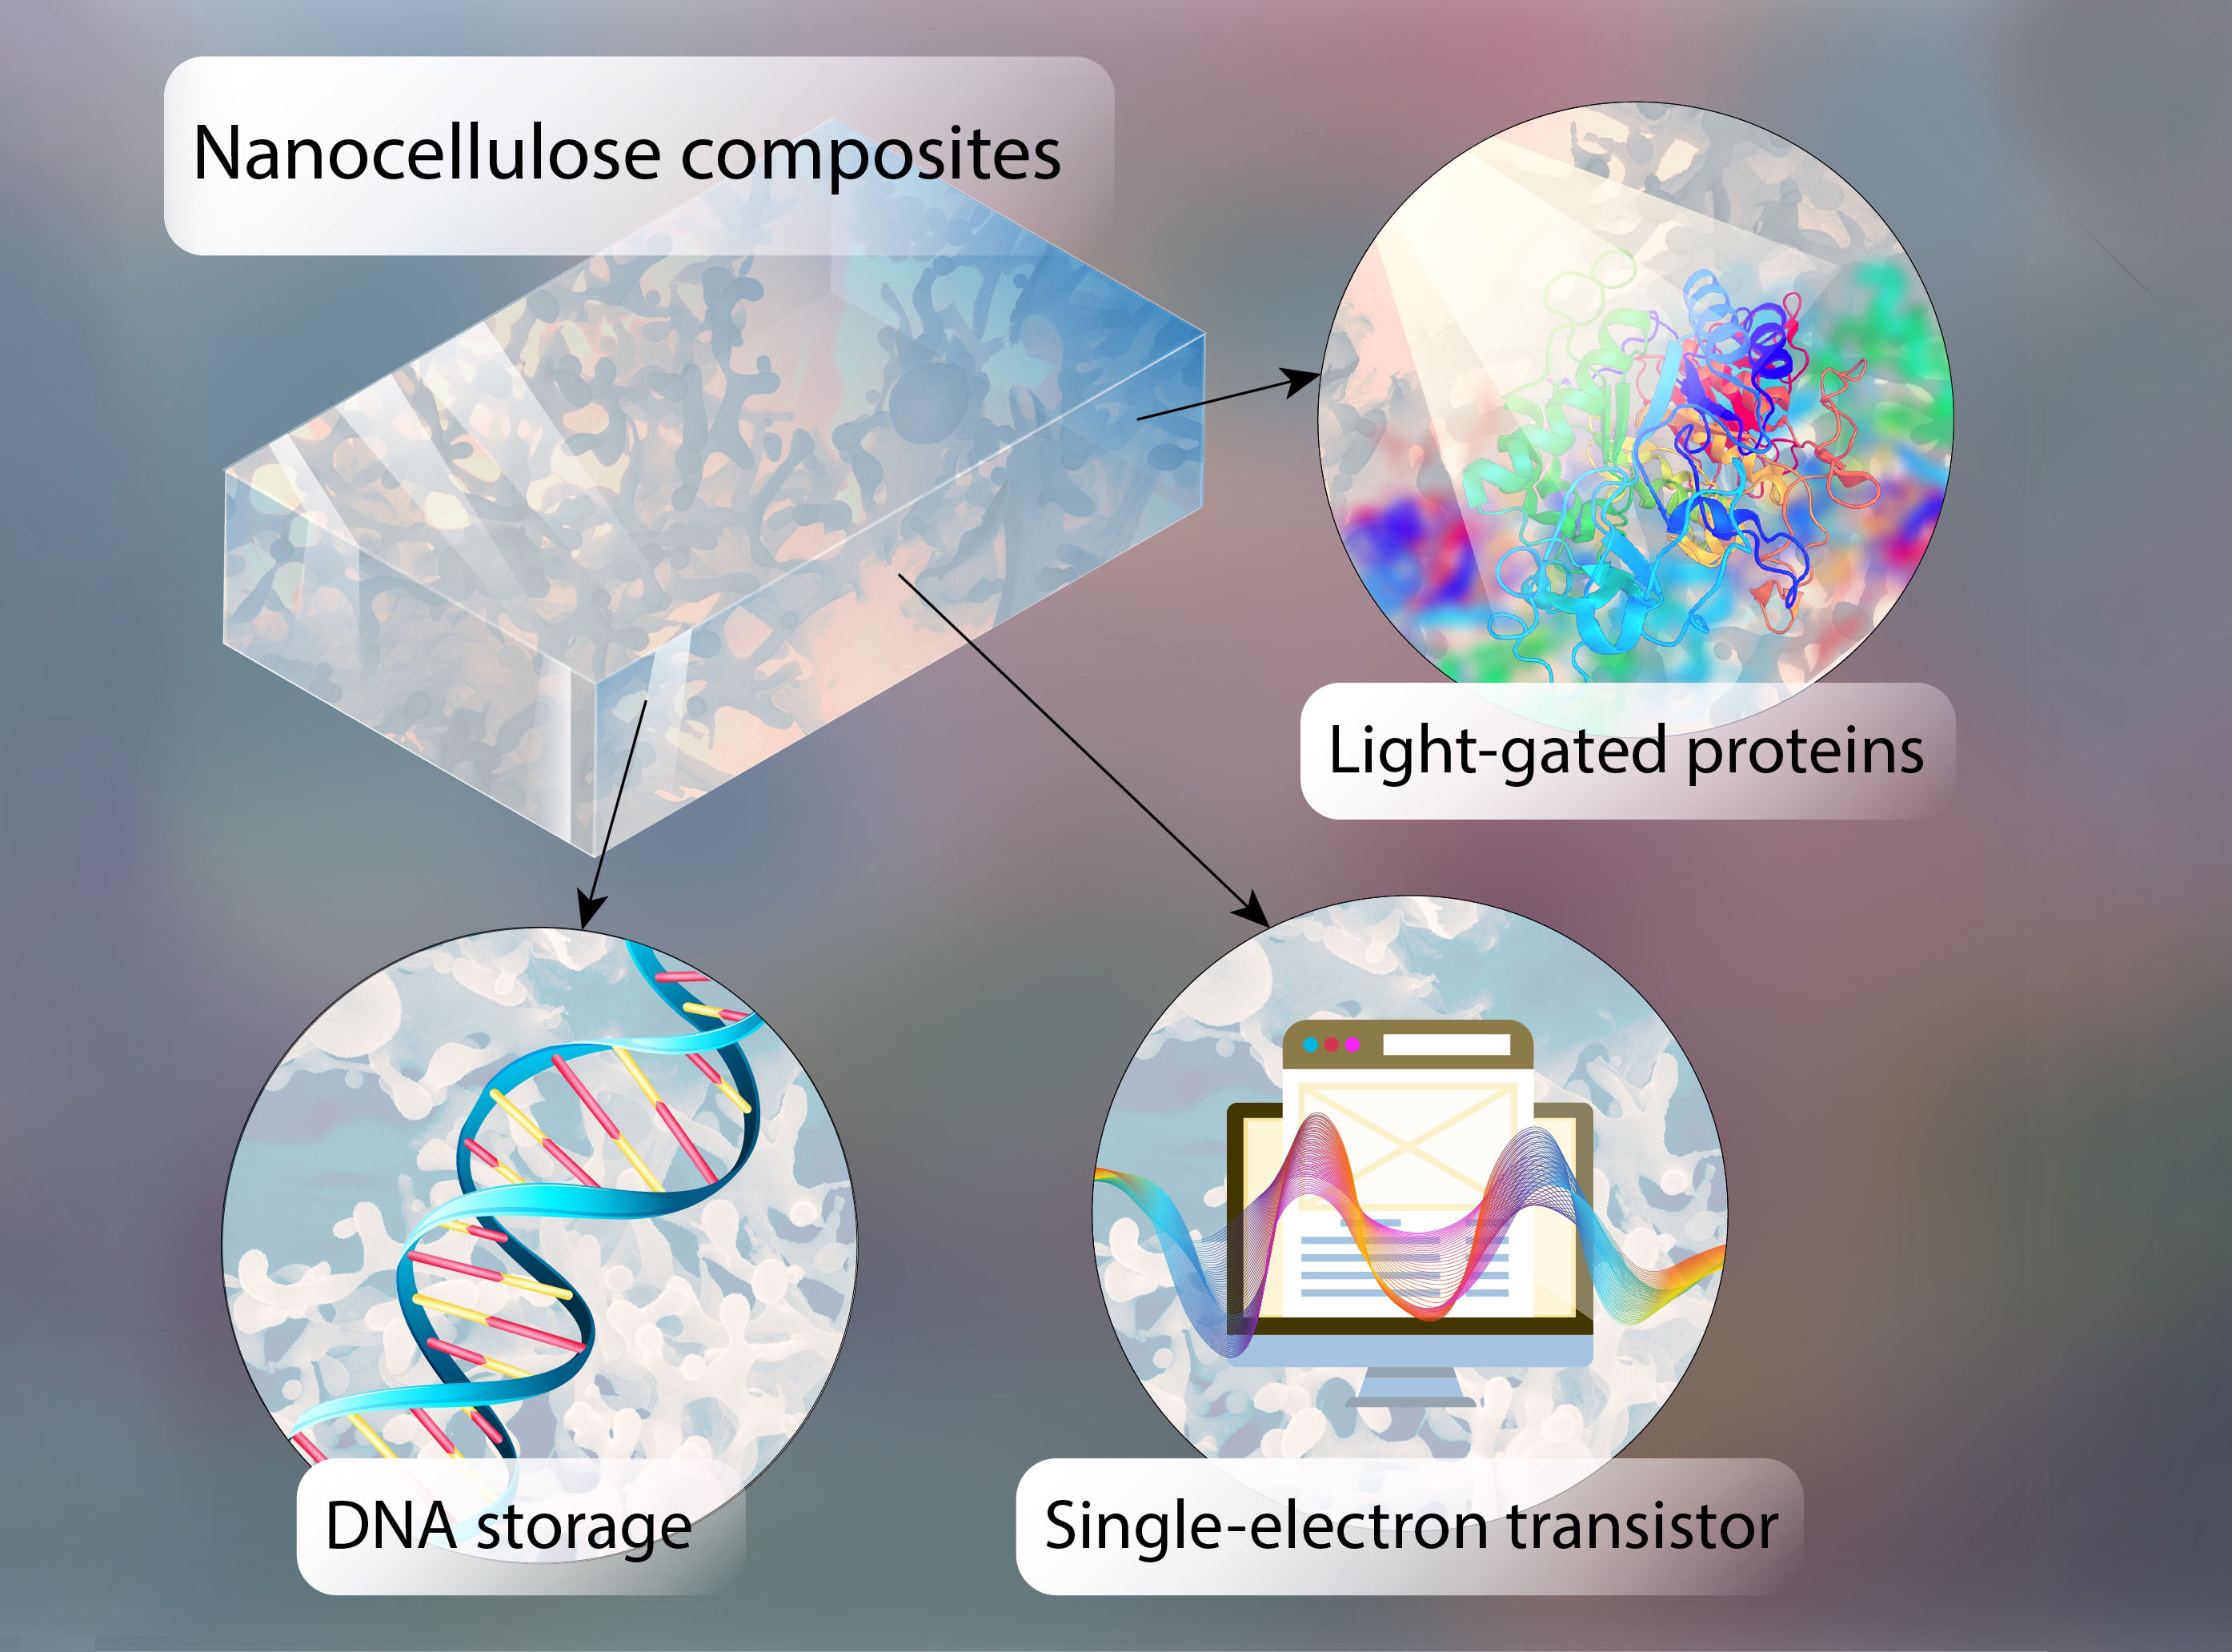 Information can be stored in the form of DNA on chips made of semiconducting nanocellulose